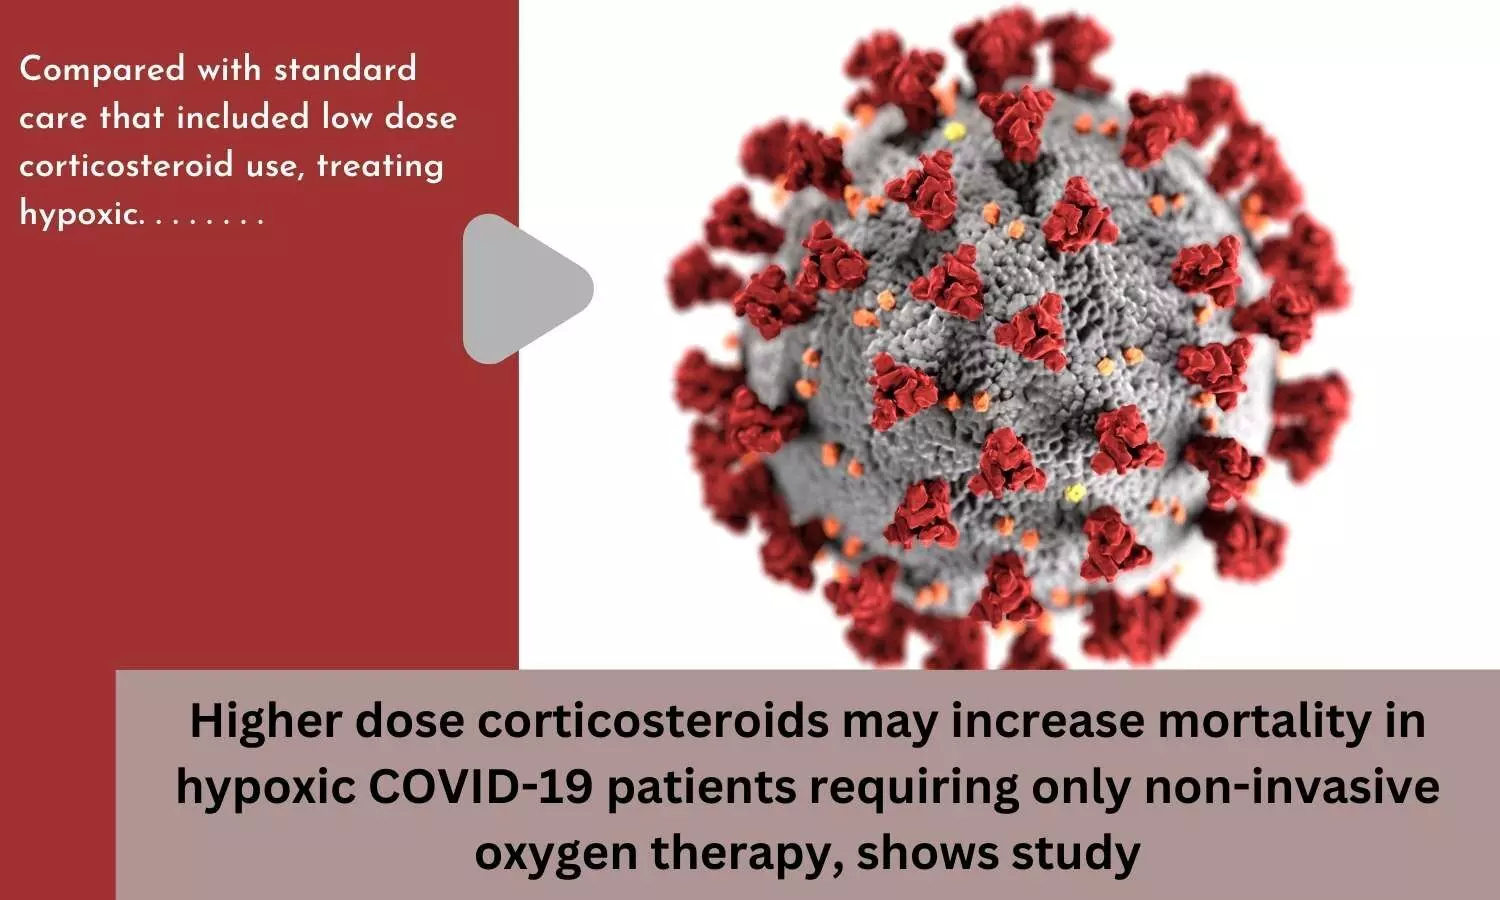 Higher dose corticosteroids may increase mortality in hypoxic COVID-19 patients requiring only non-invasive oxygen therapy, shows study